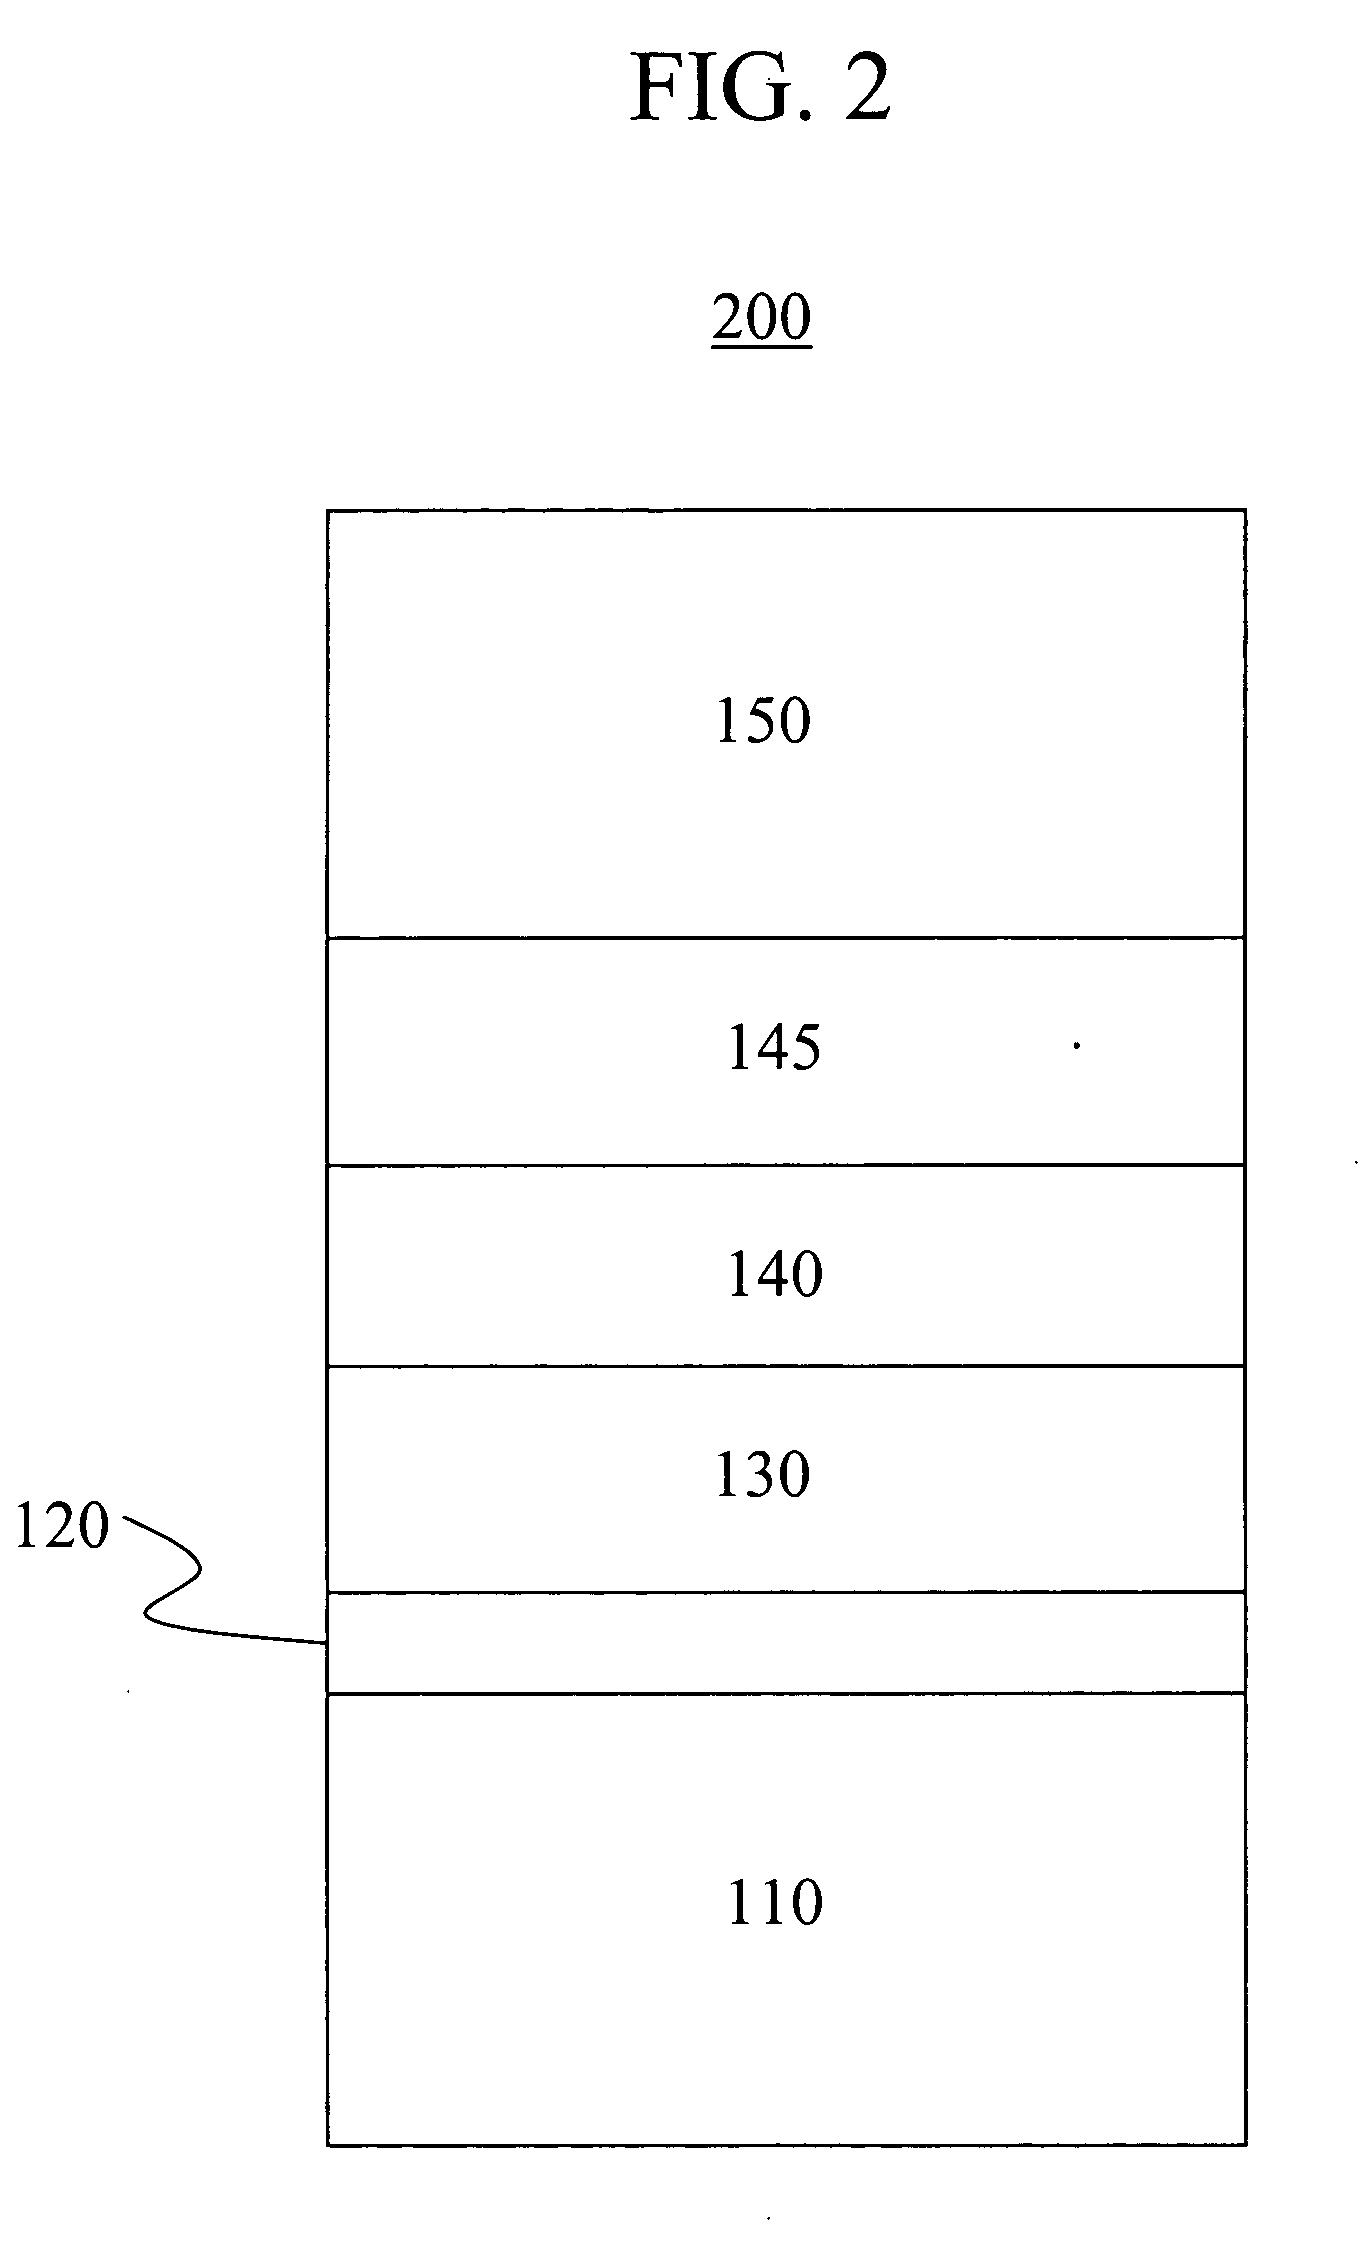 Aligned crystalline semiconducting film on a glass substrate and method of making